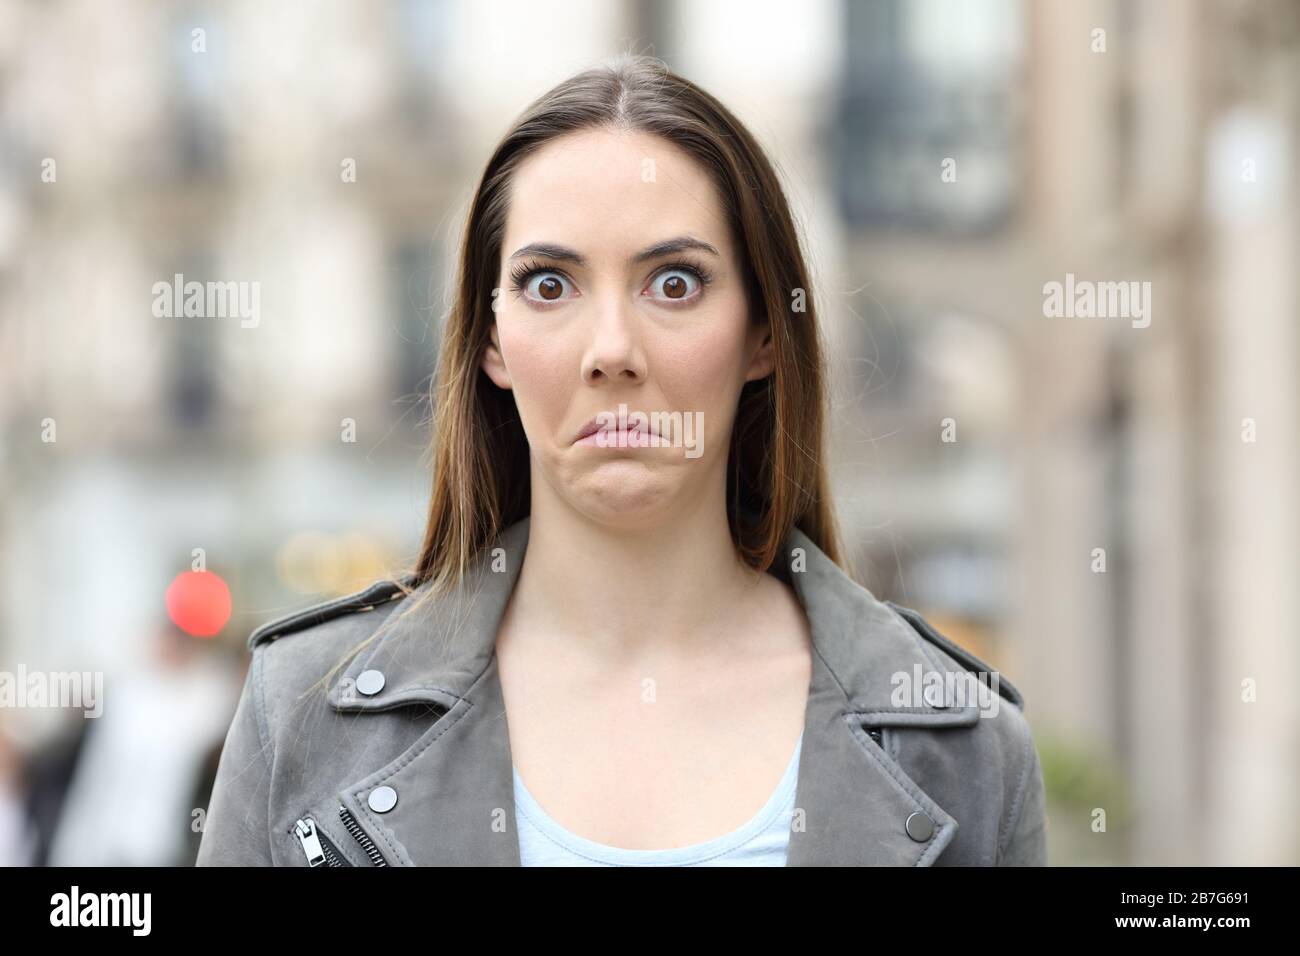 Front view portrait of a shocked young woman looking perplexed at camera on city street Stock Photo